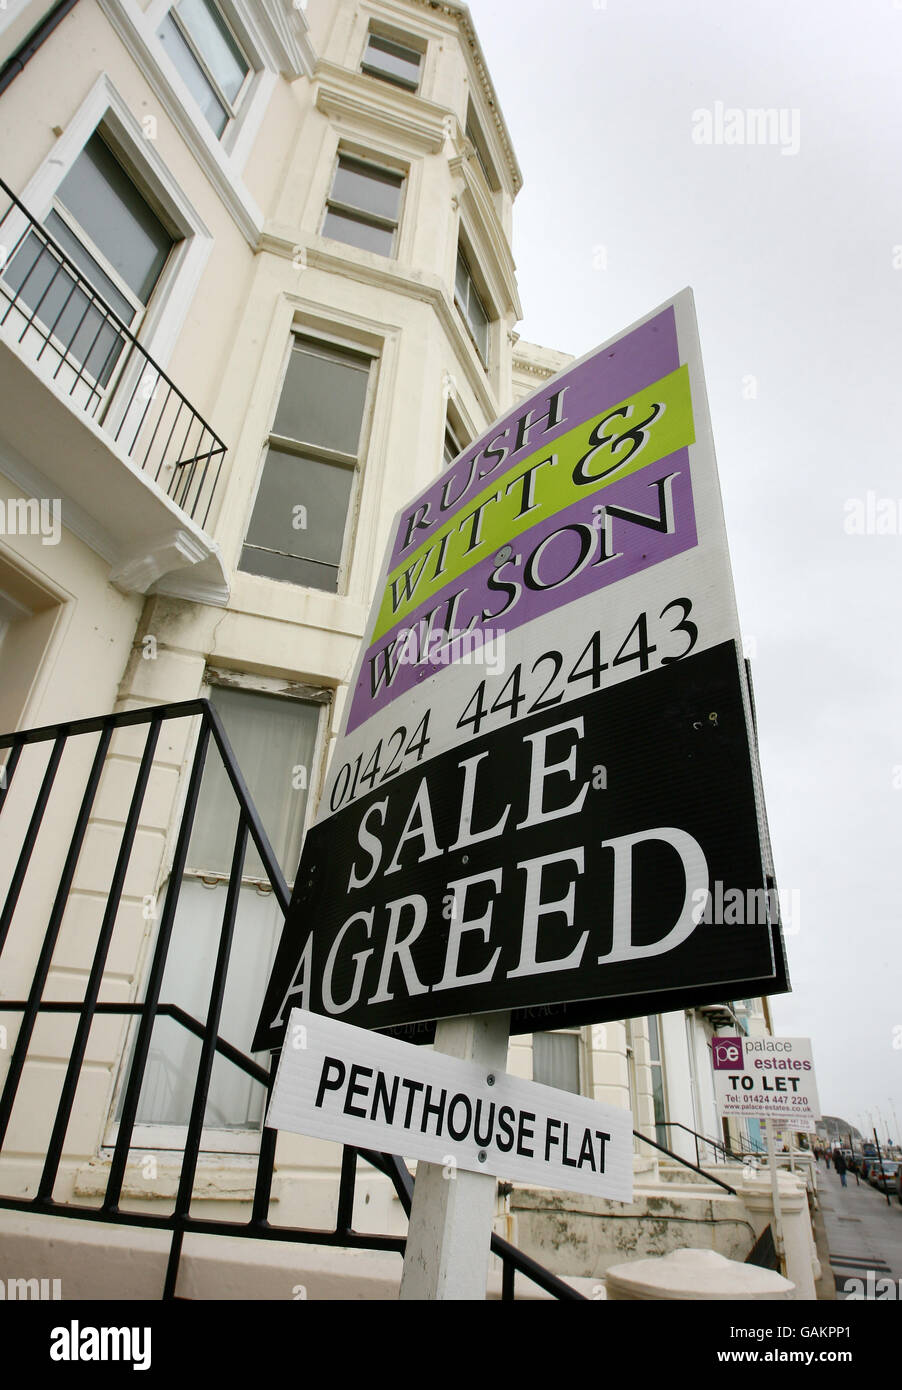 A general view of an estate agent's board on display along the seafront in Hastings, East Sussex. Stock Photo